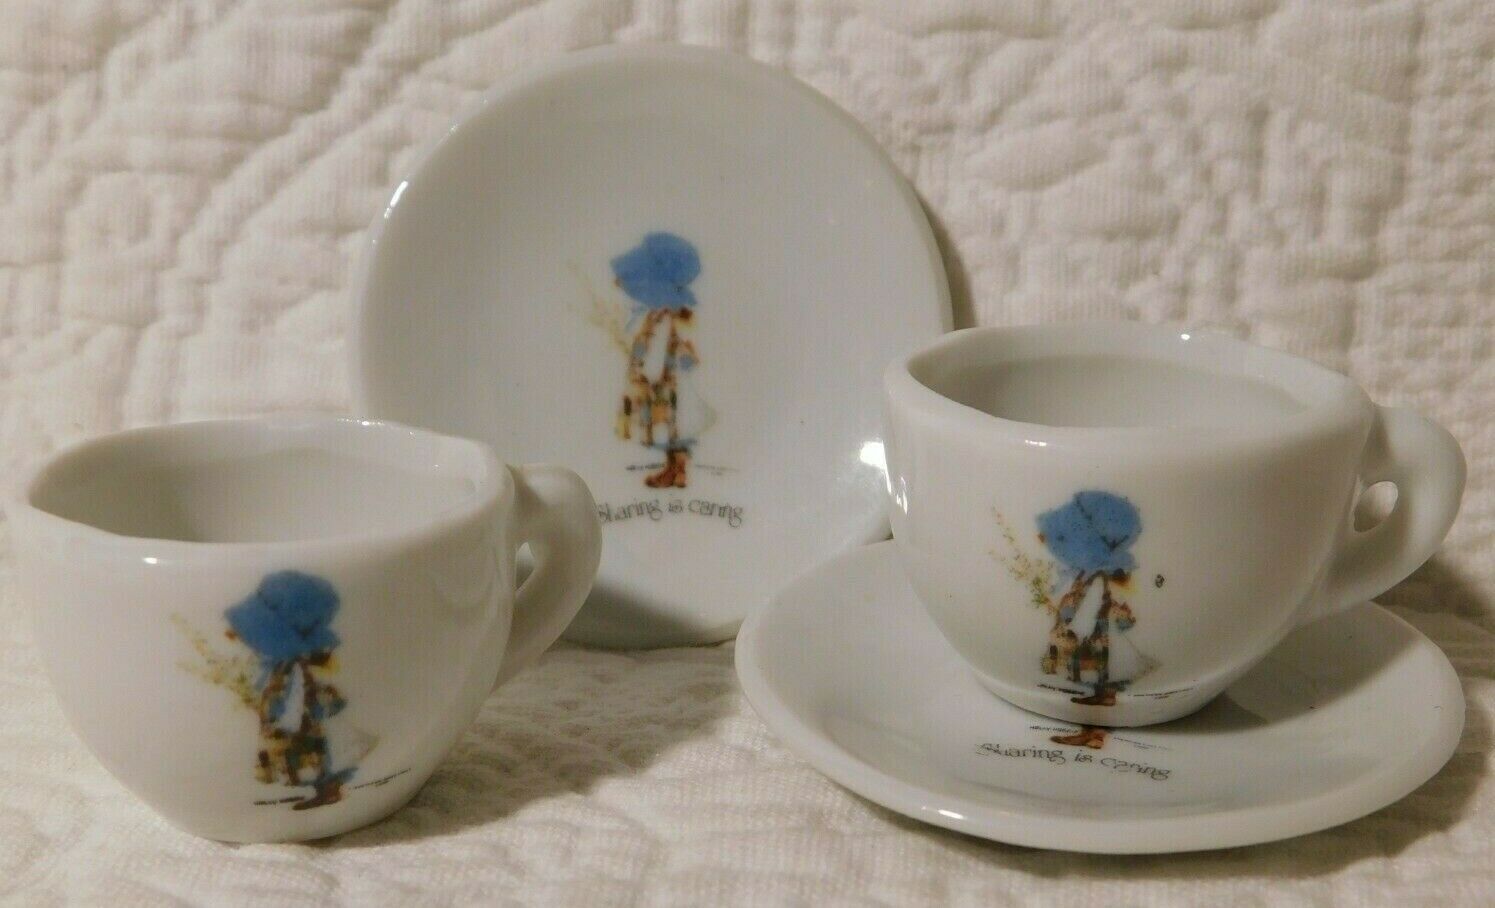 2 Vintage Holly Hobbie MINIATURE Tea CUPS & SAUCERs Sharing Is Caring Japan